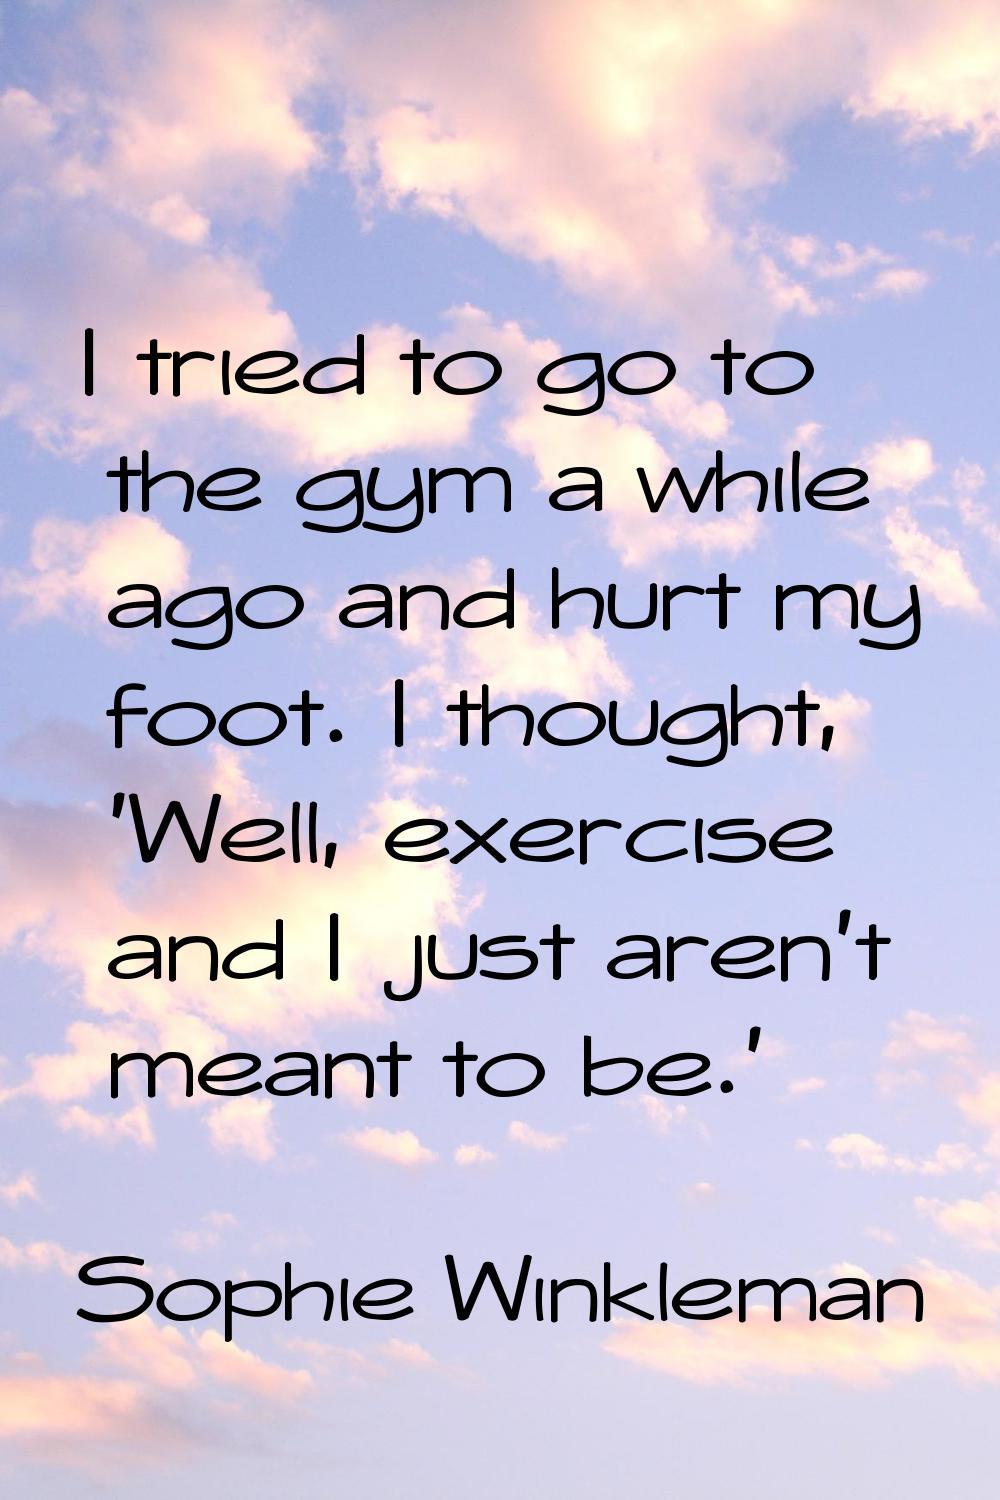 I tried to go to the gym a while ago and hurt my foot. I thought, 'Well, exercise and I just aren't